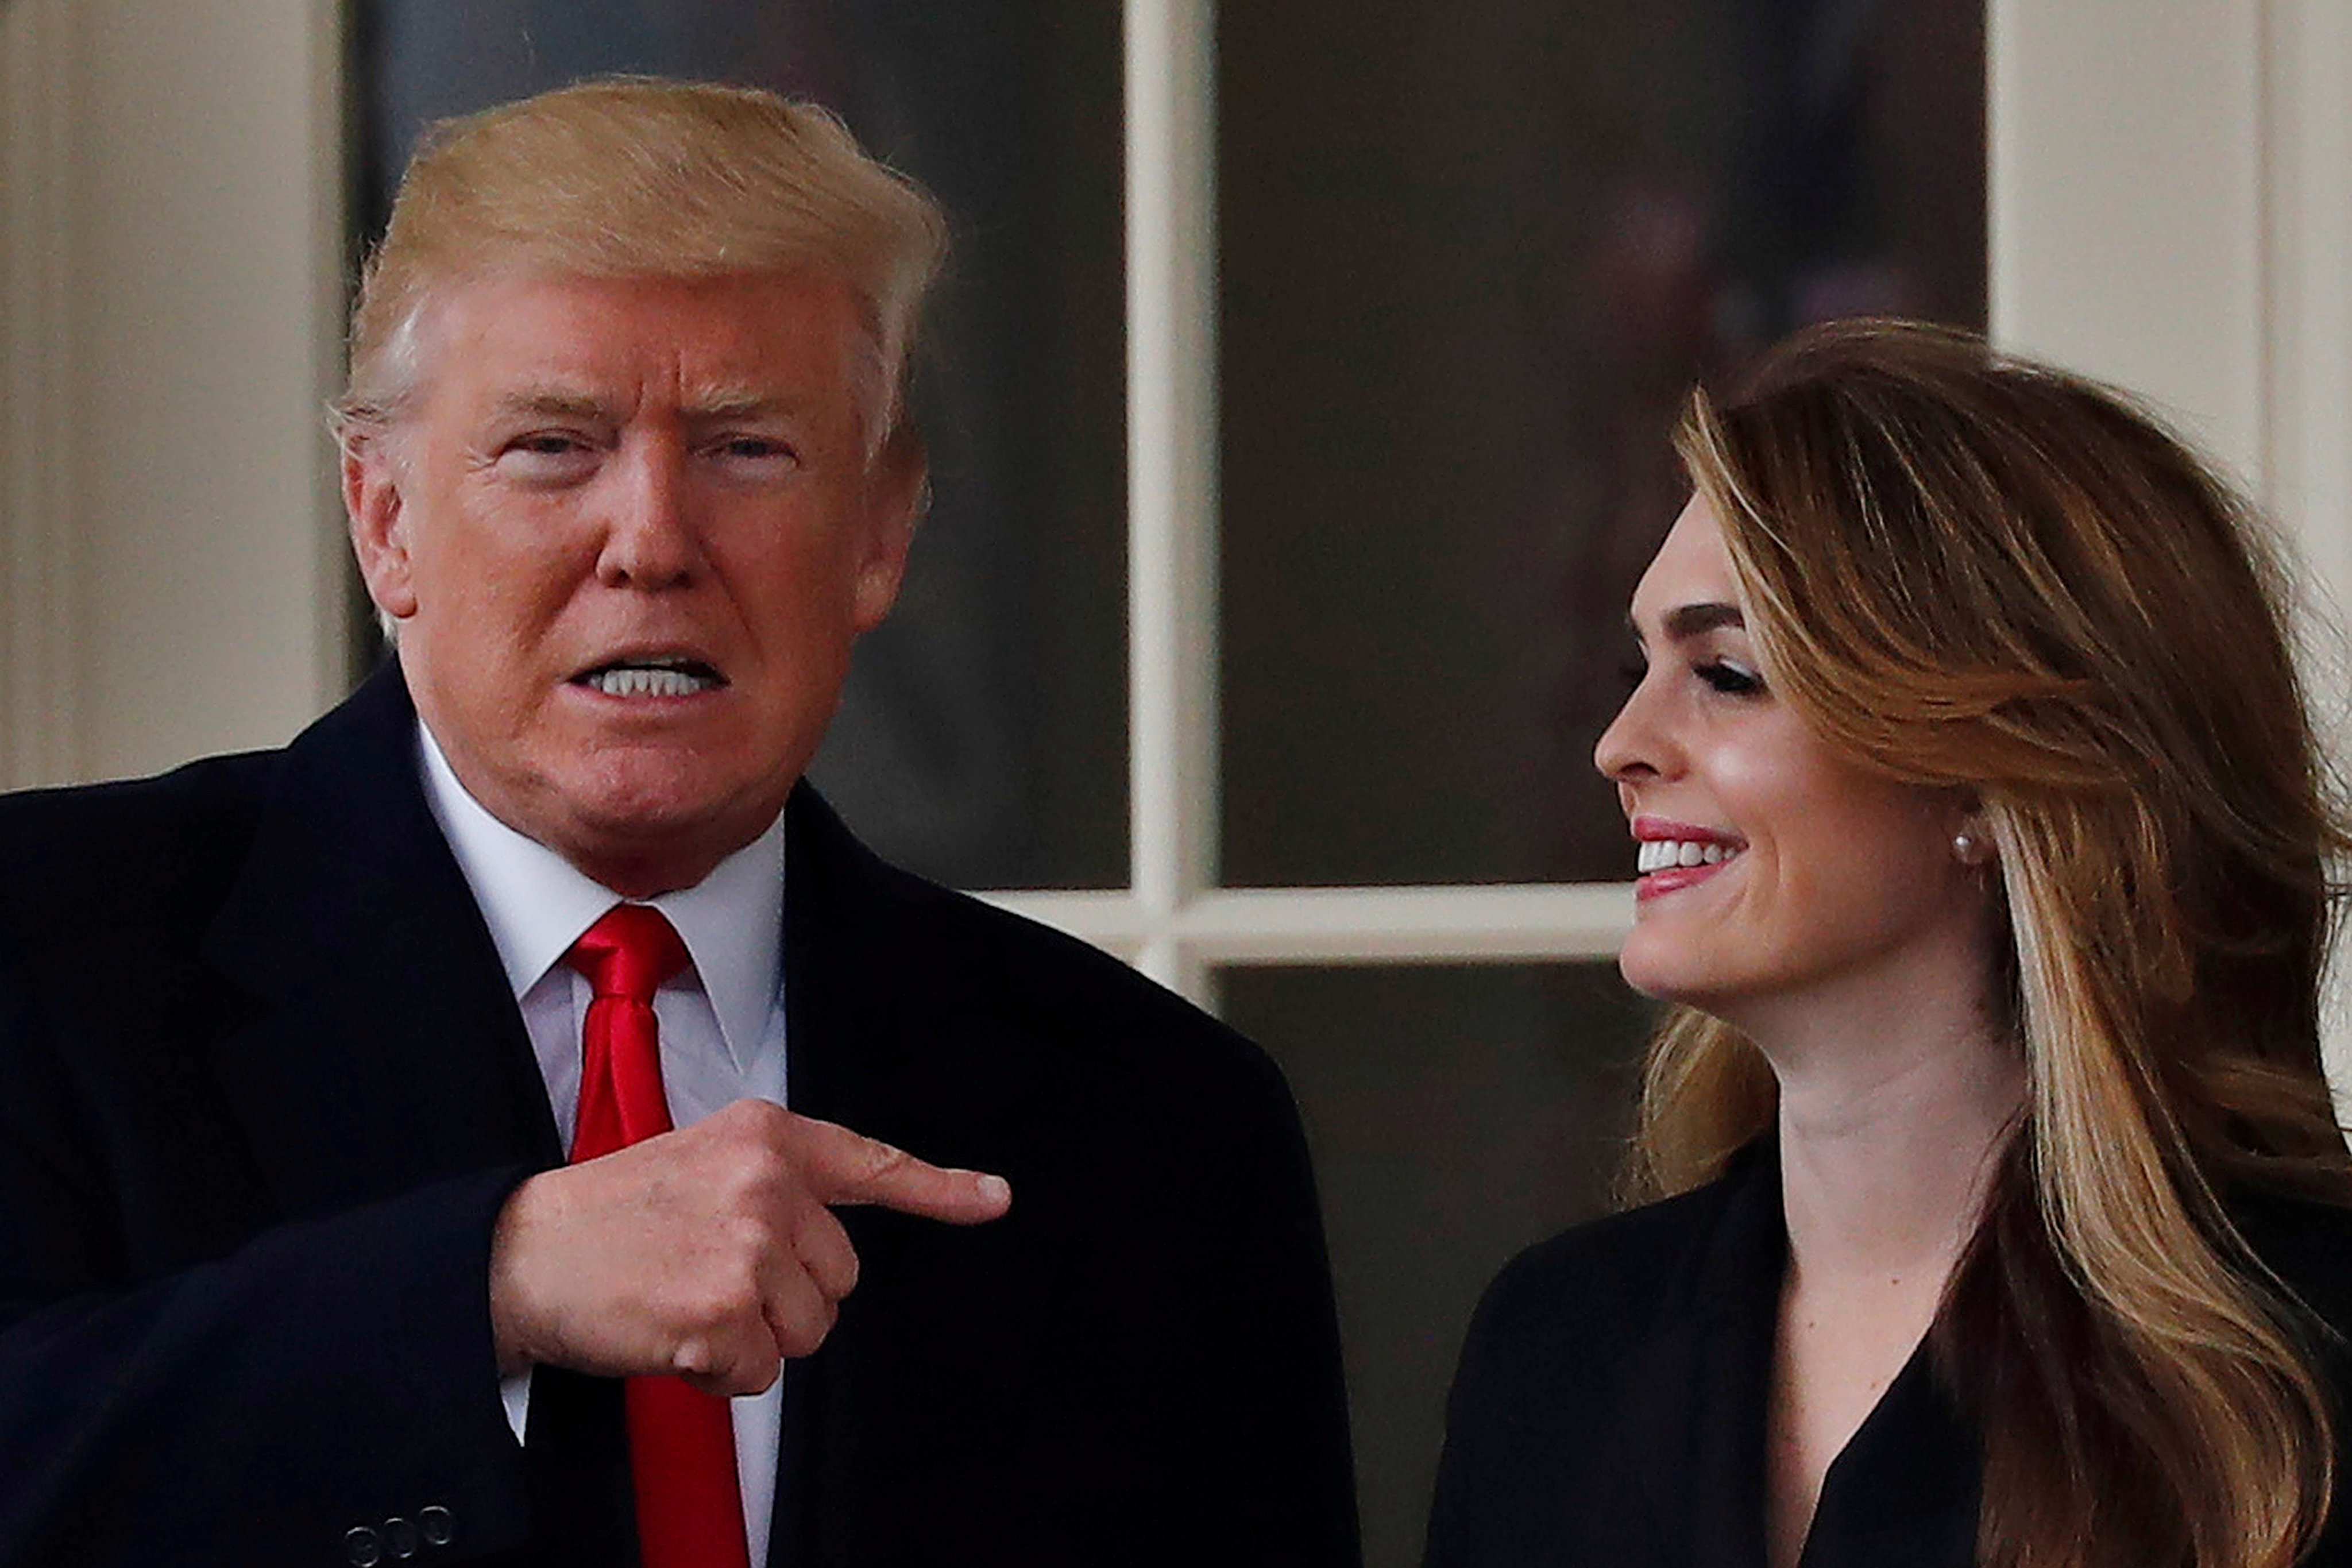 US President Donald Trump stands next to former White House communications director Hope Hicks outside the Oval Office in March 2018. Photo: Reuters